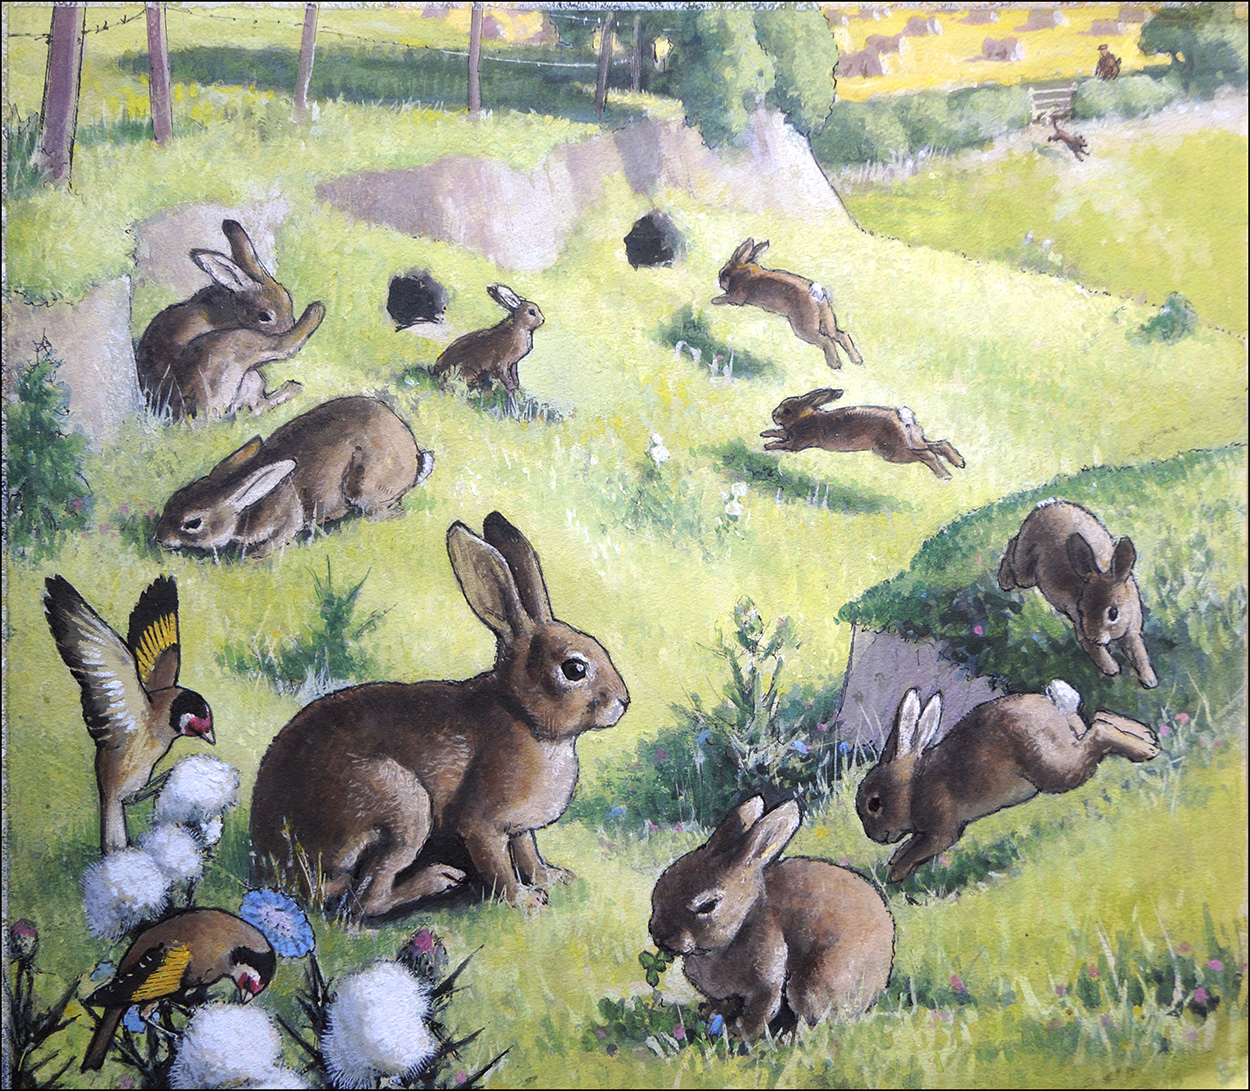 Bouncing Bunnies (Original) art by G W Backhouse Art at The Illustration Art Gallery